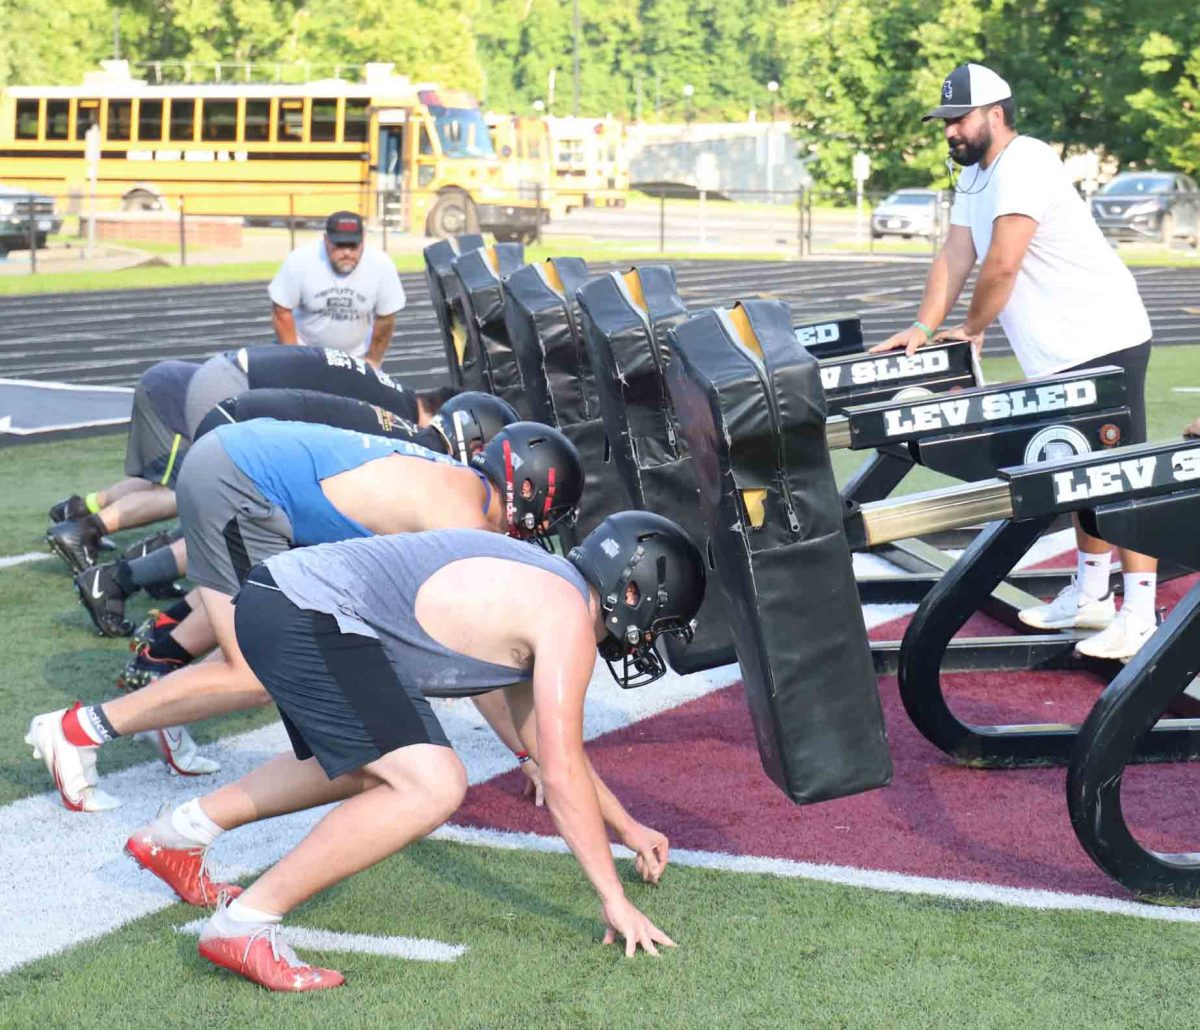 Harlan County assistant coach Scotty Bailey led a sled drill during a recent practice session. Harlan County will open its season Aug. 19 at Middlesboro.